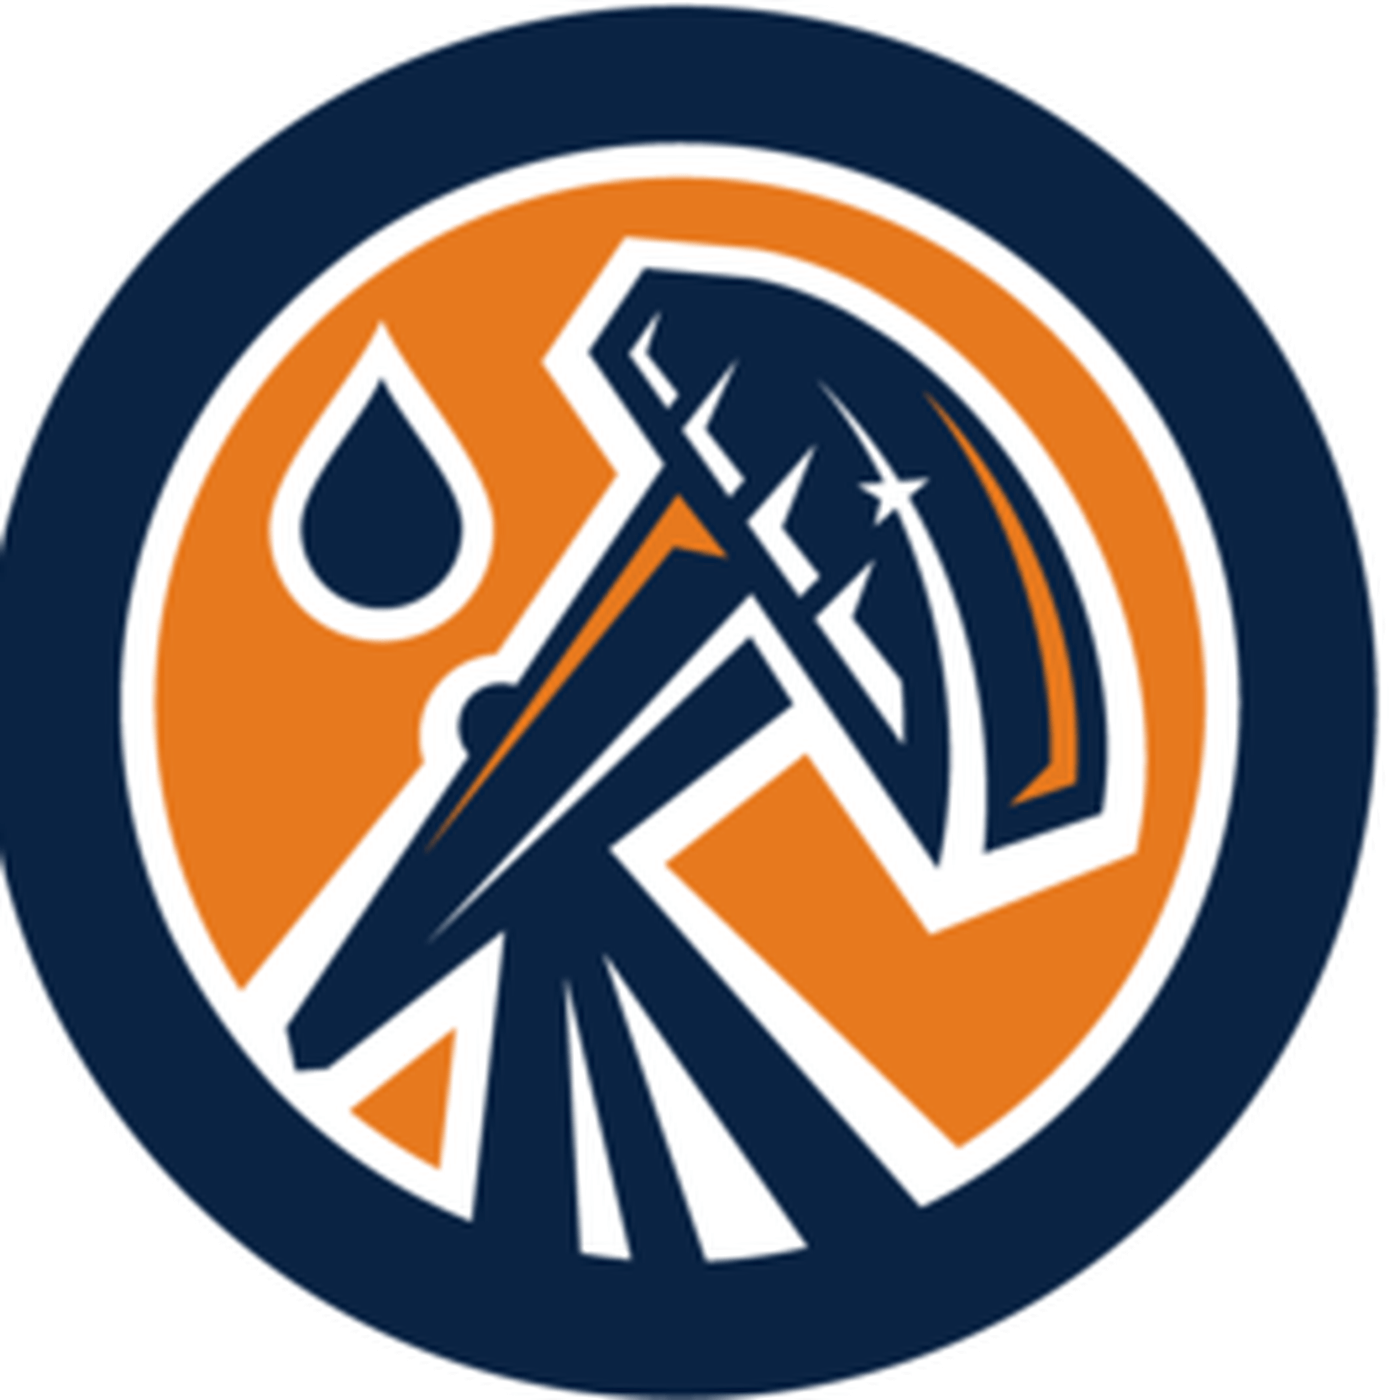 Blue and Copper Logo - Oklahoma City Barons Logos Discovered - The Copper & Blue